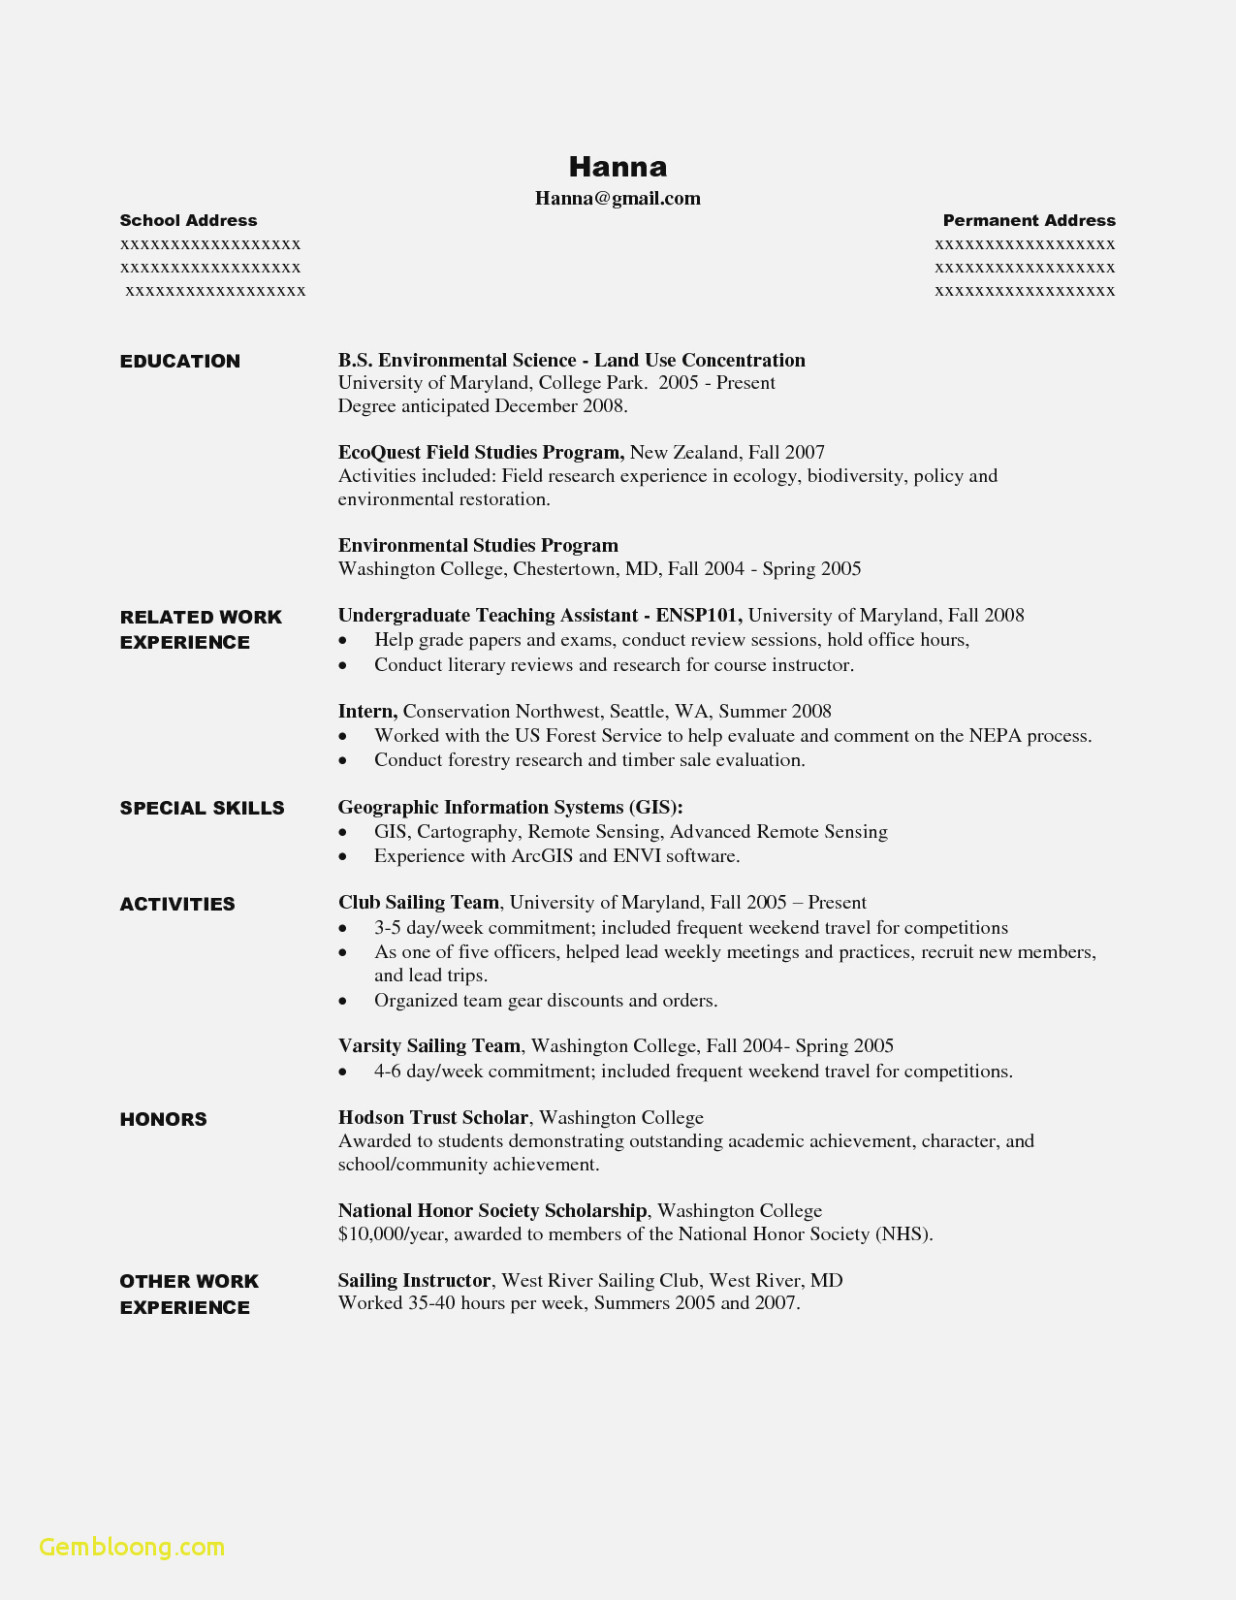 resume for college student seeking